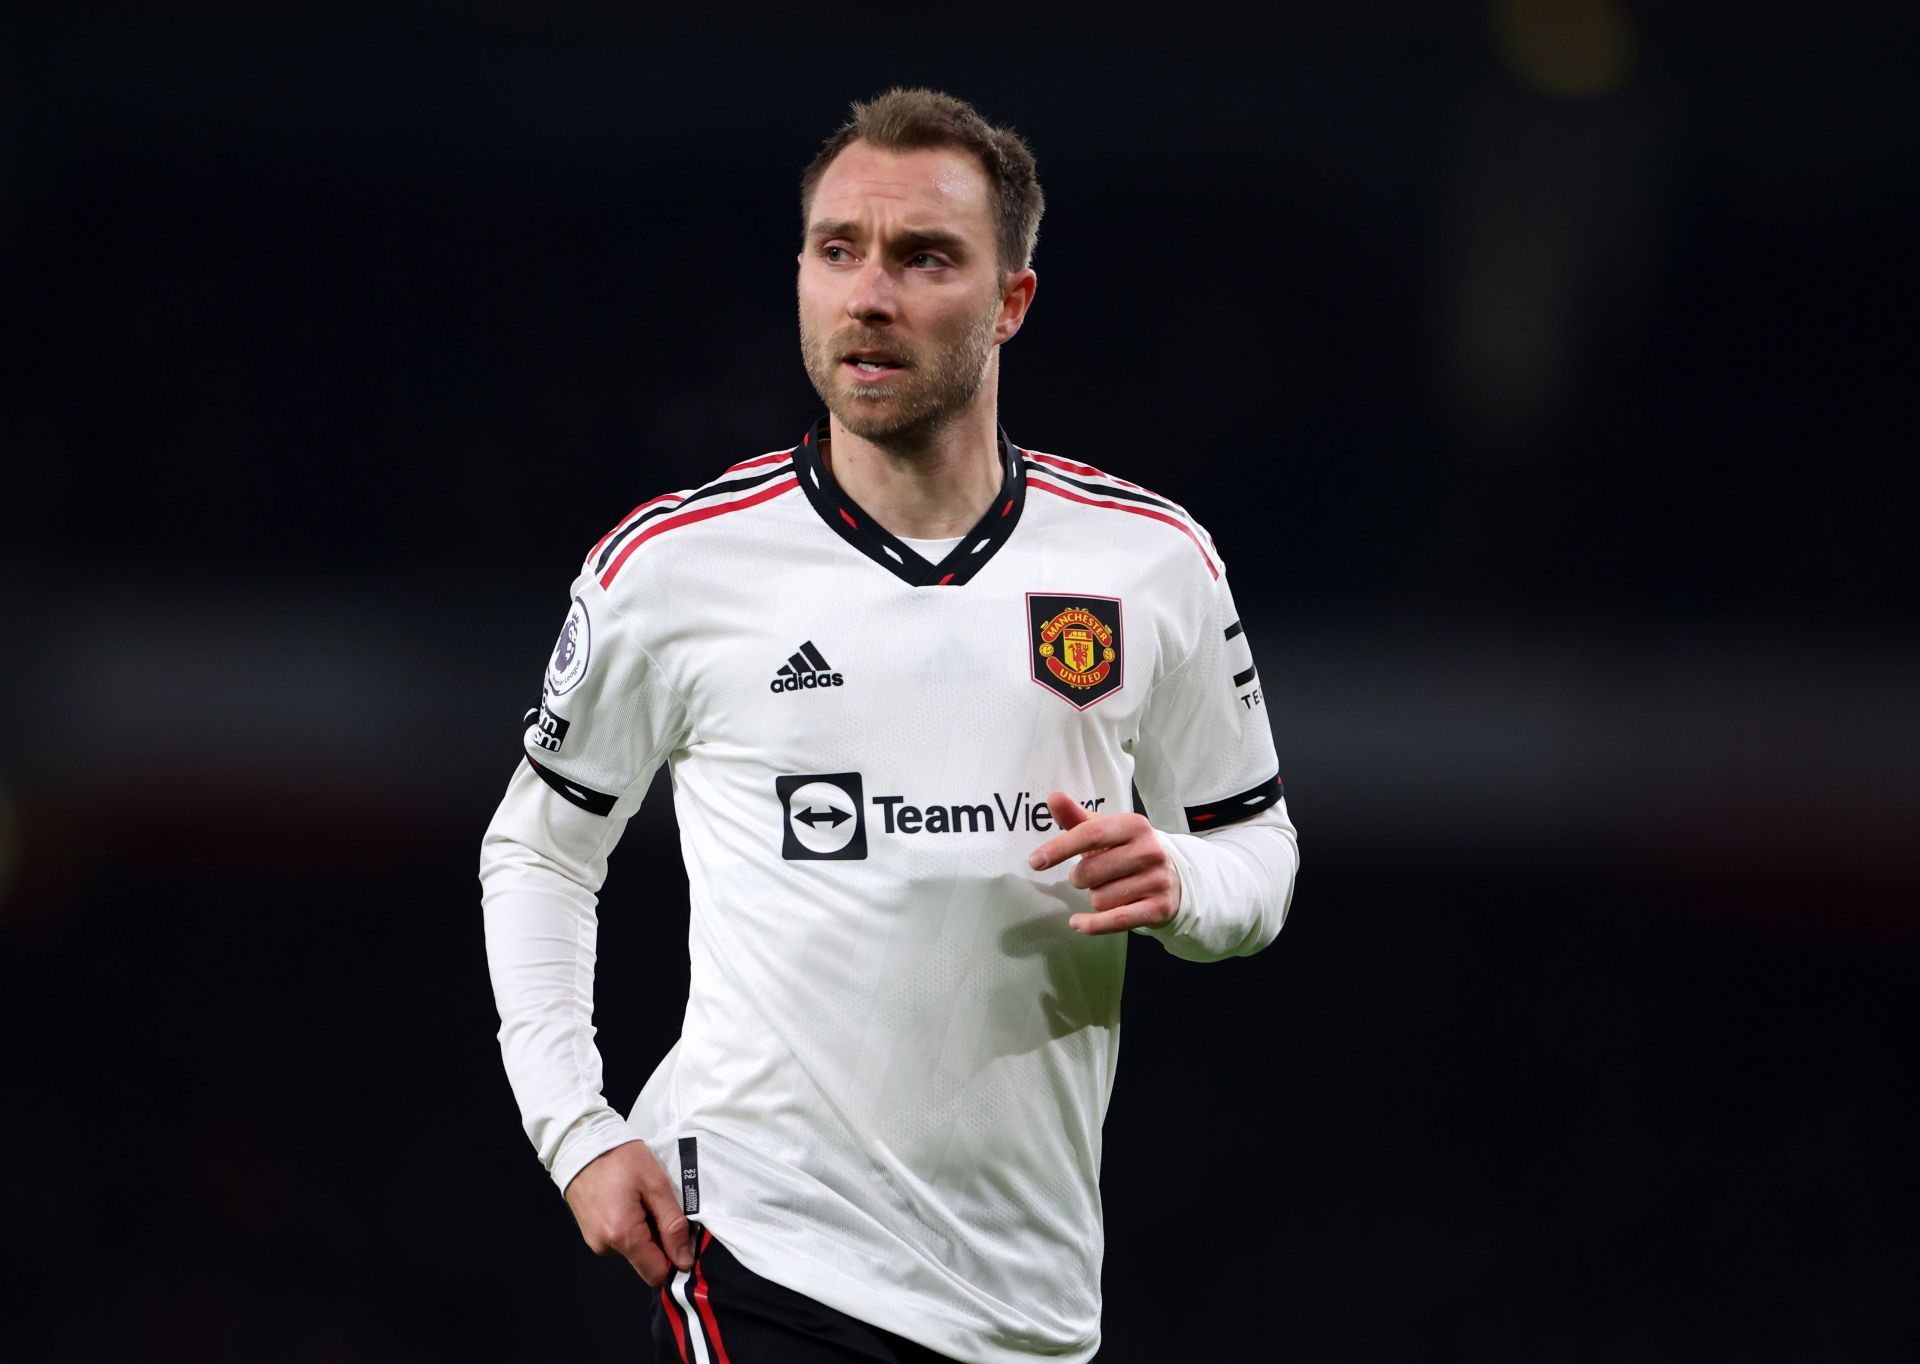 Christian Eriksen will likely miss the remainder of the season.